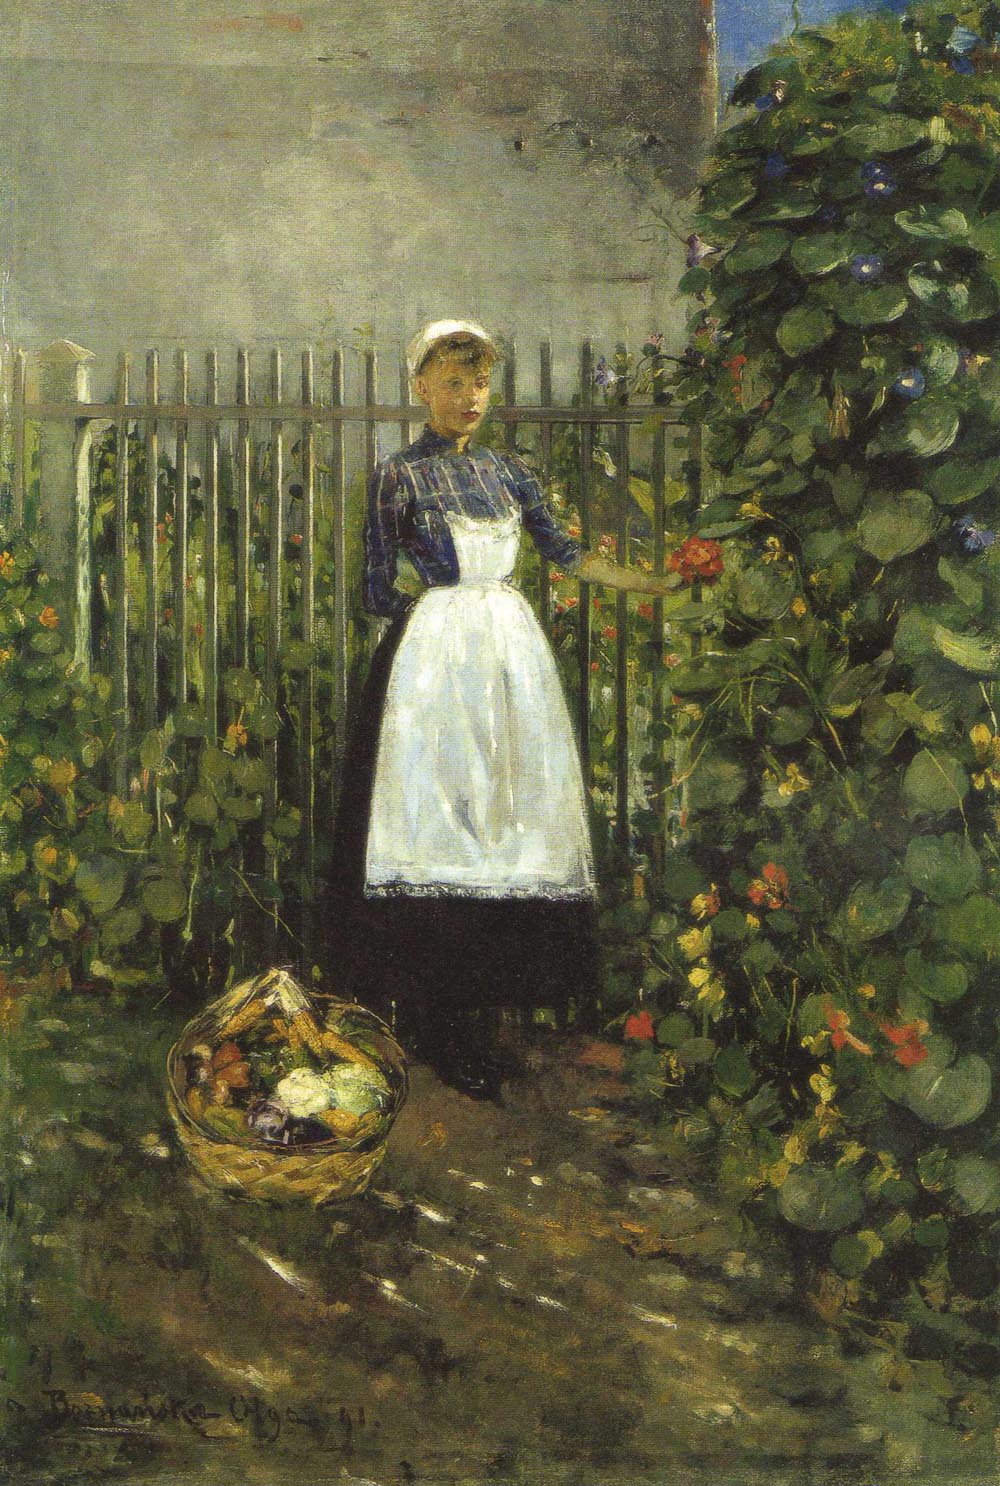 Girl with a Basket of Vegetables in a Garden